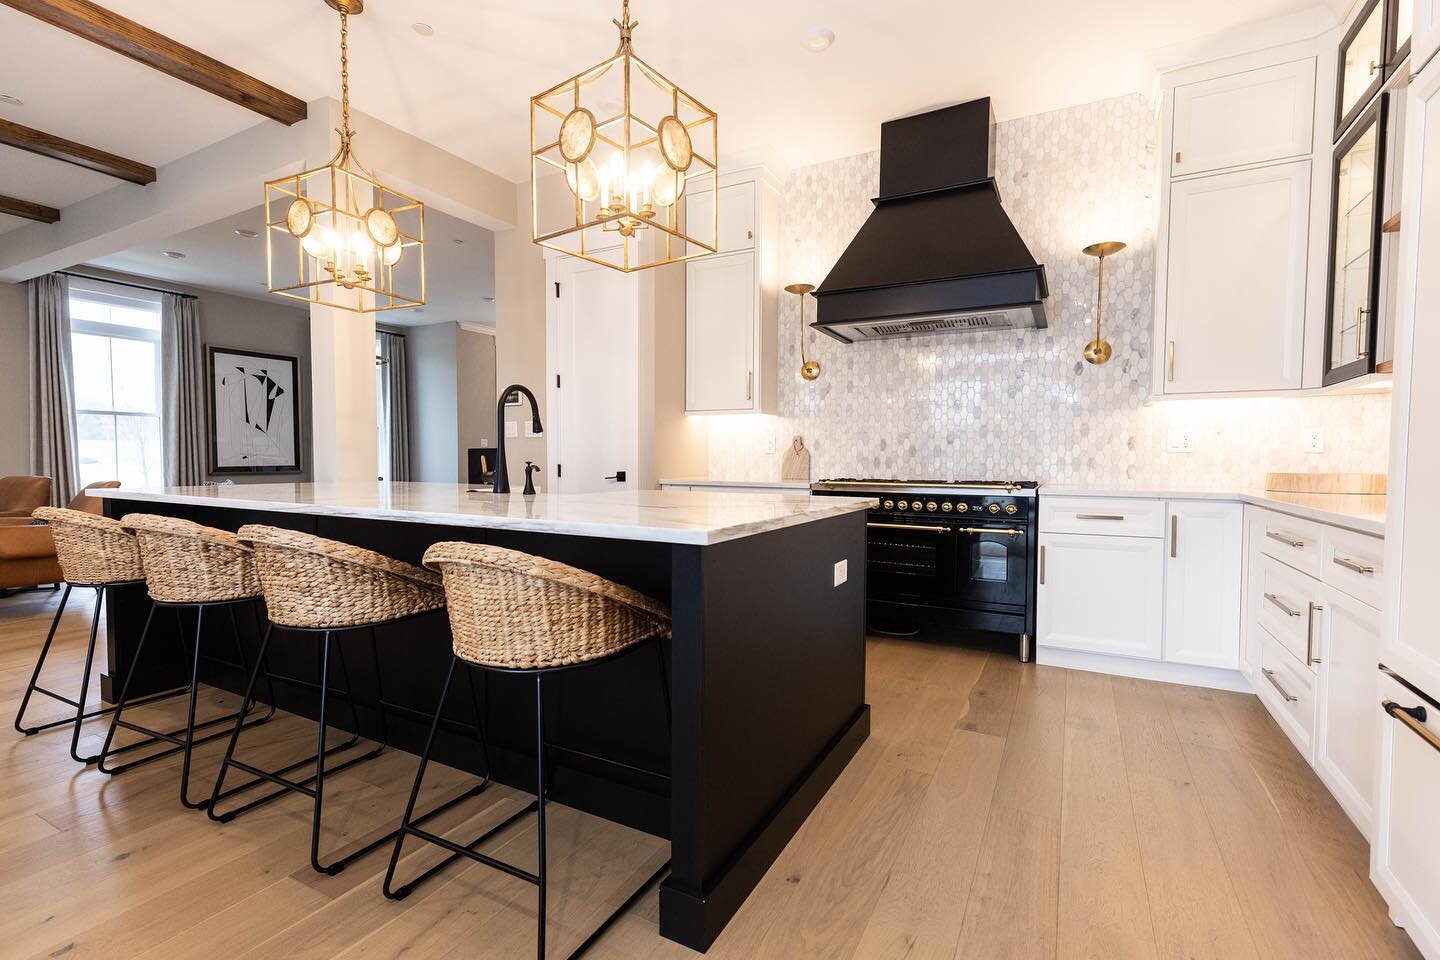 Black and brass, the ultimate power couple 🖤💛 We can't get enough of the way these elements play off each other in this gorgeous kitchen.

We love these modern light fixtures.💡 Not only do they provide the ideal lighting to prepare and cook meals,